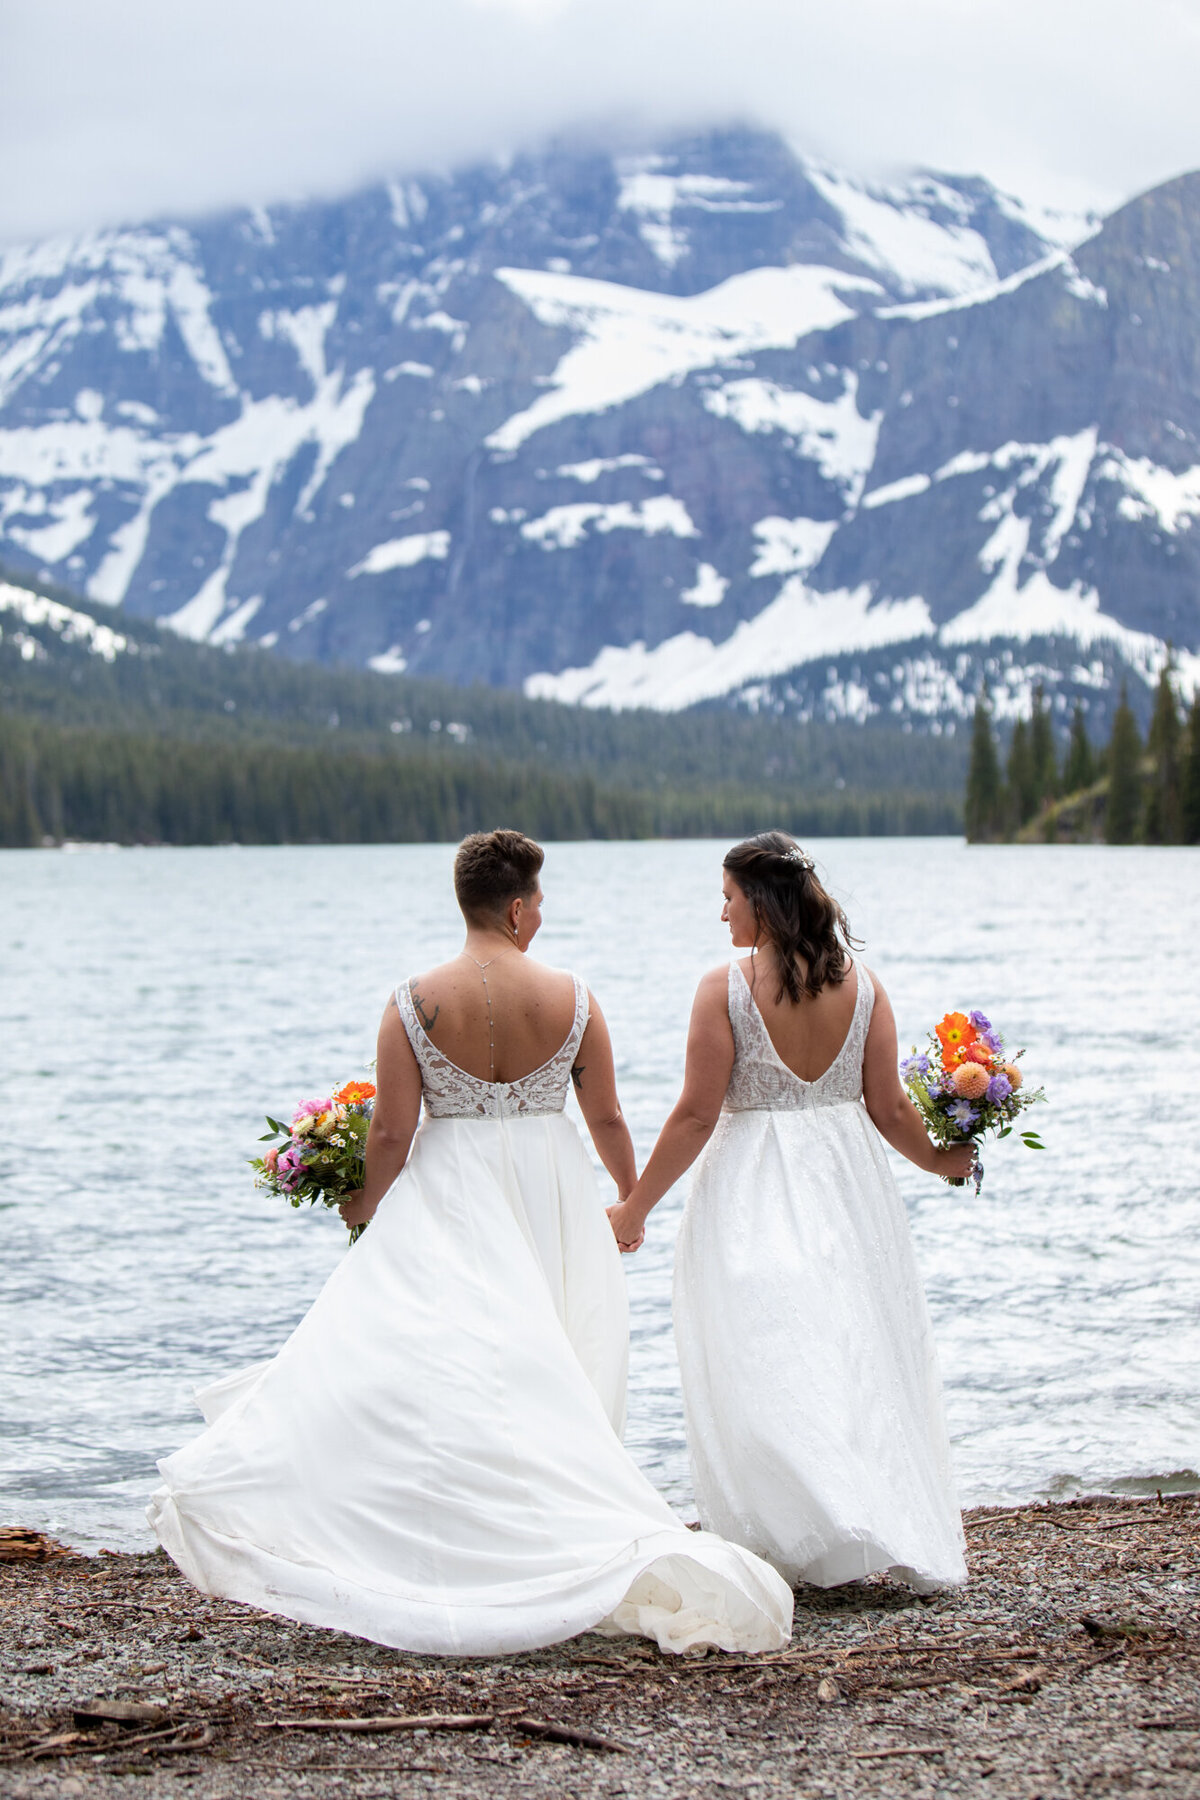 Two brides stand with colorful bouquets holding hands next to a lake in montana.